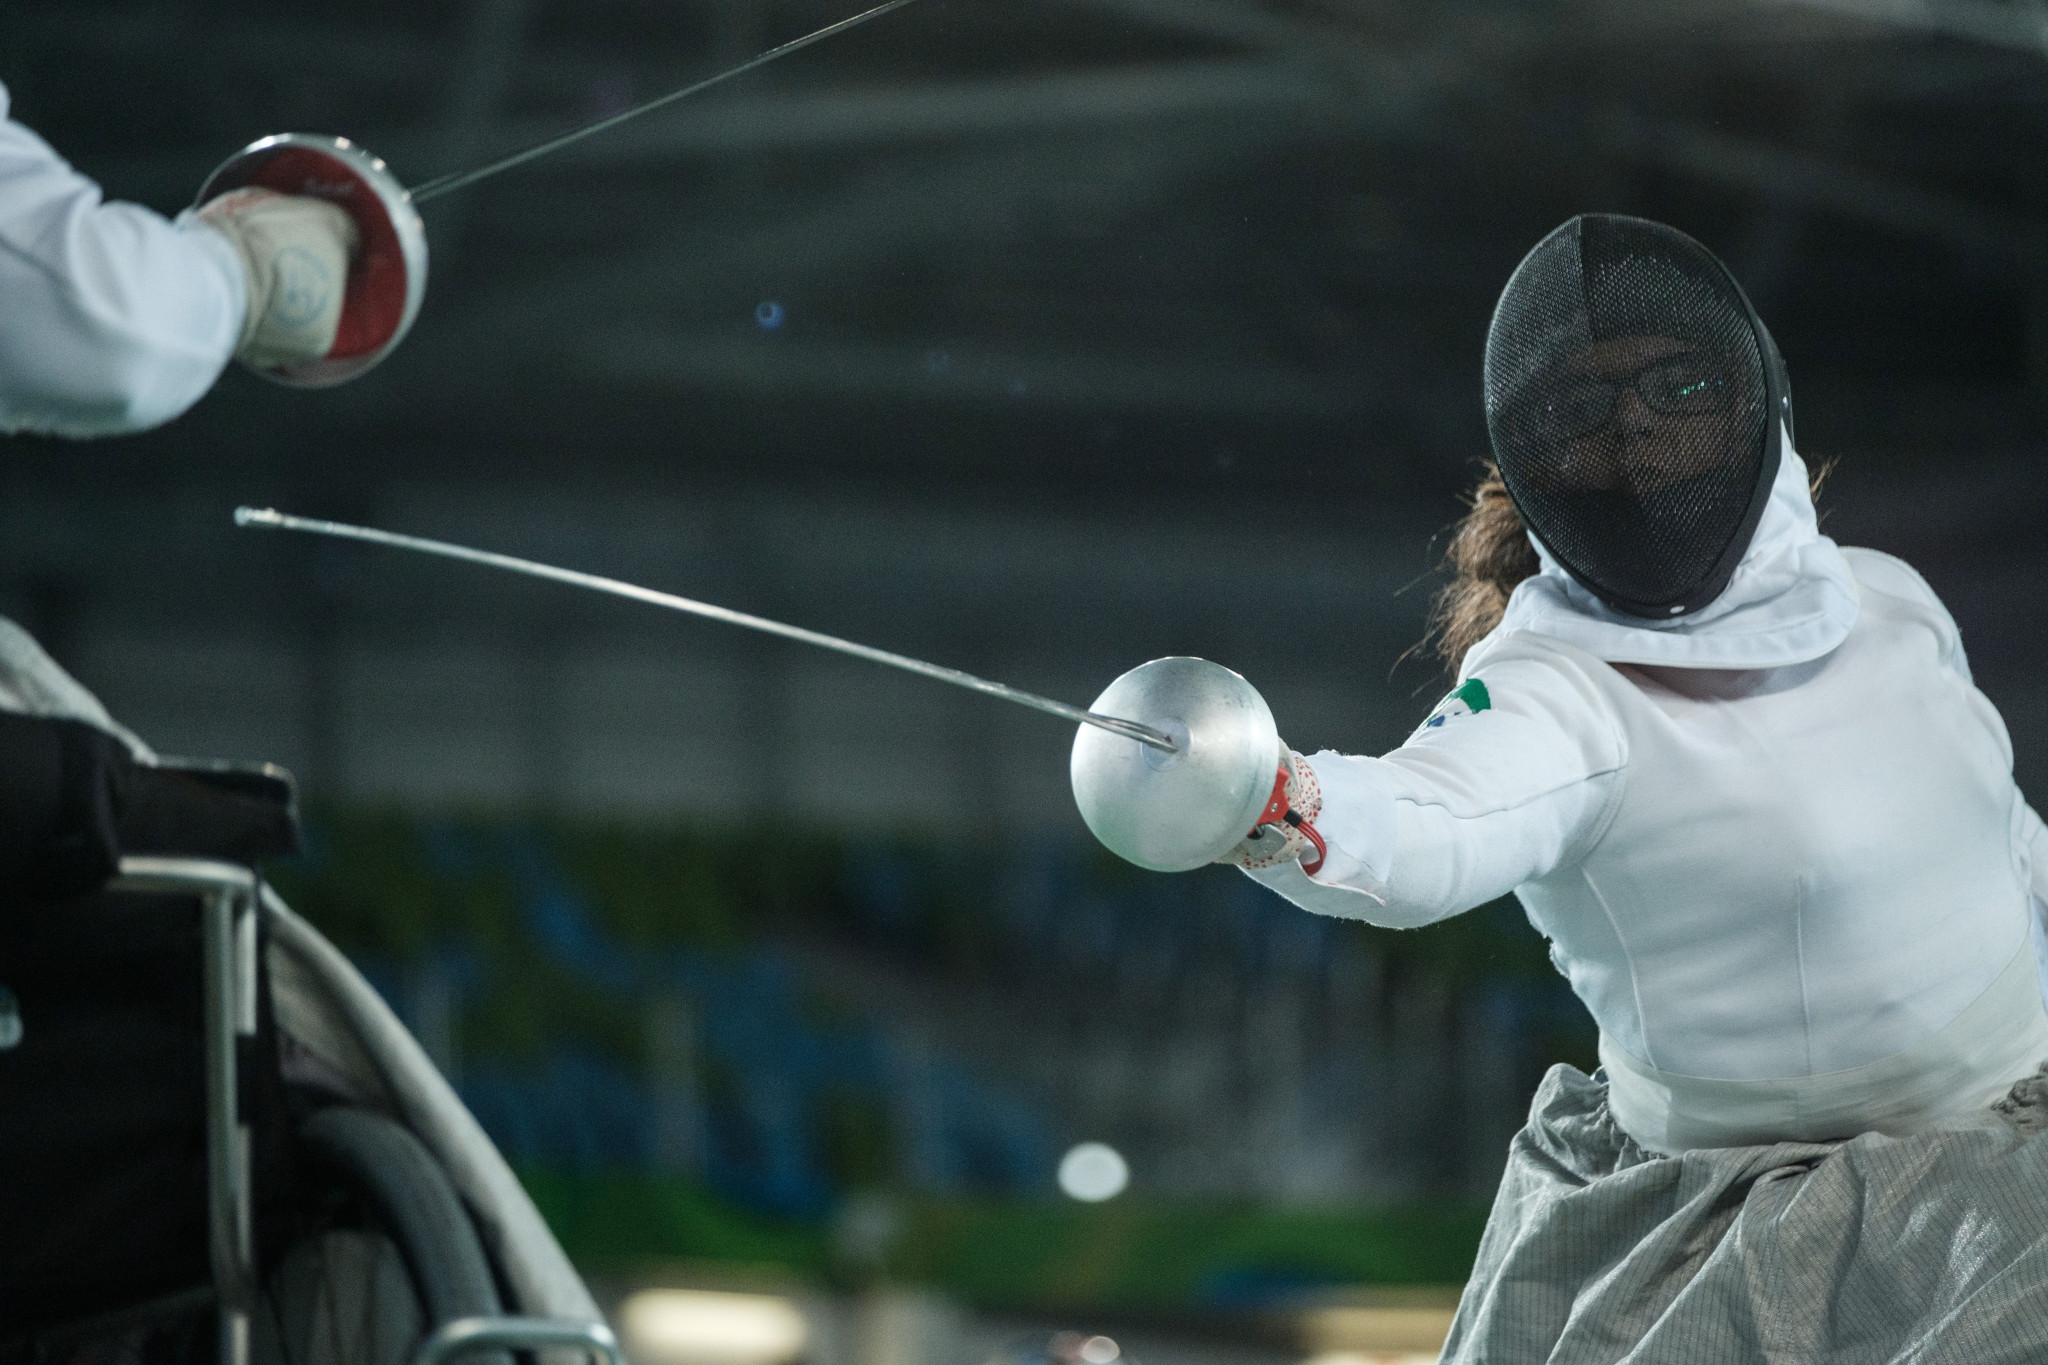 Hungary earned two gold medals on the first day of the IWAS Wheelchair Fencing World Championships in Rome ©Getty Images